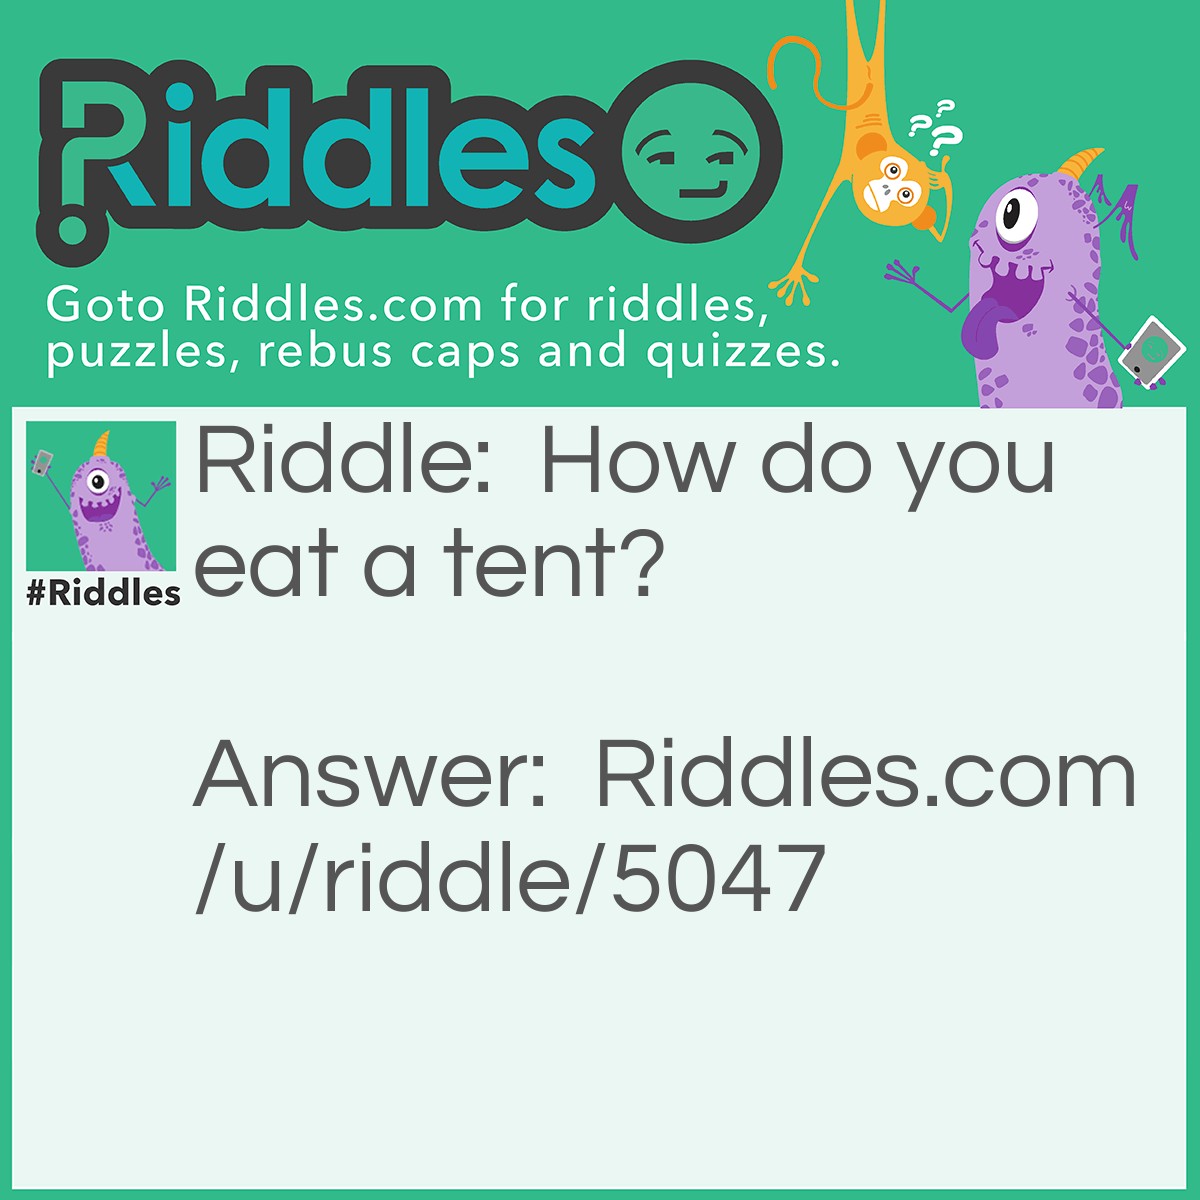 Riddle: How do you eat a tent? Answer: With you mouth!